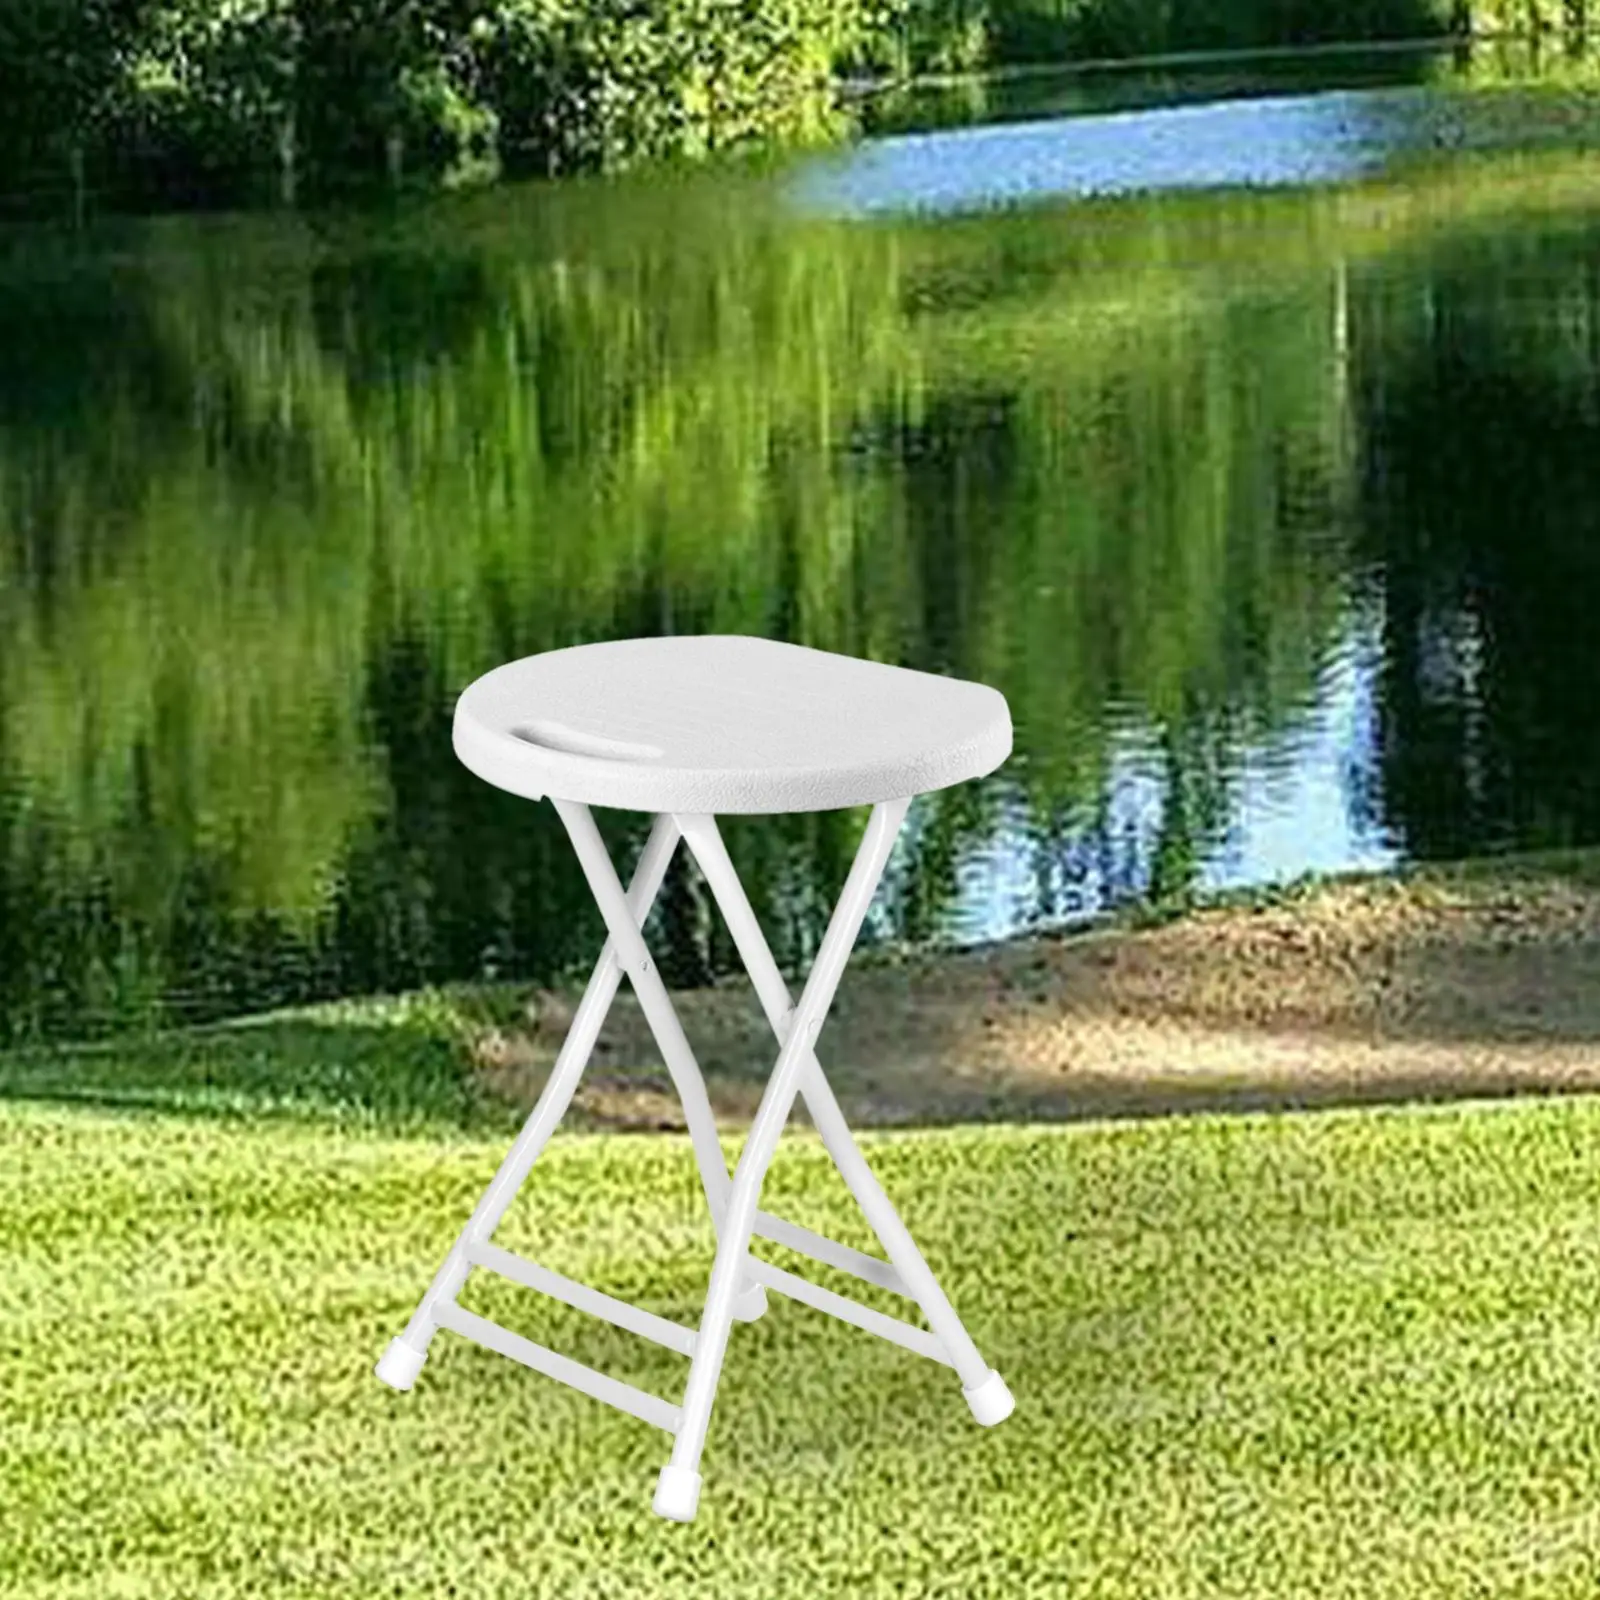 Folding Stool High Stool, Dormitory Chair Outdoor Foldable Stool Camping Chair for Fishing, BBQ, Hiking, Travel Beach